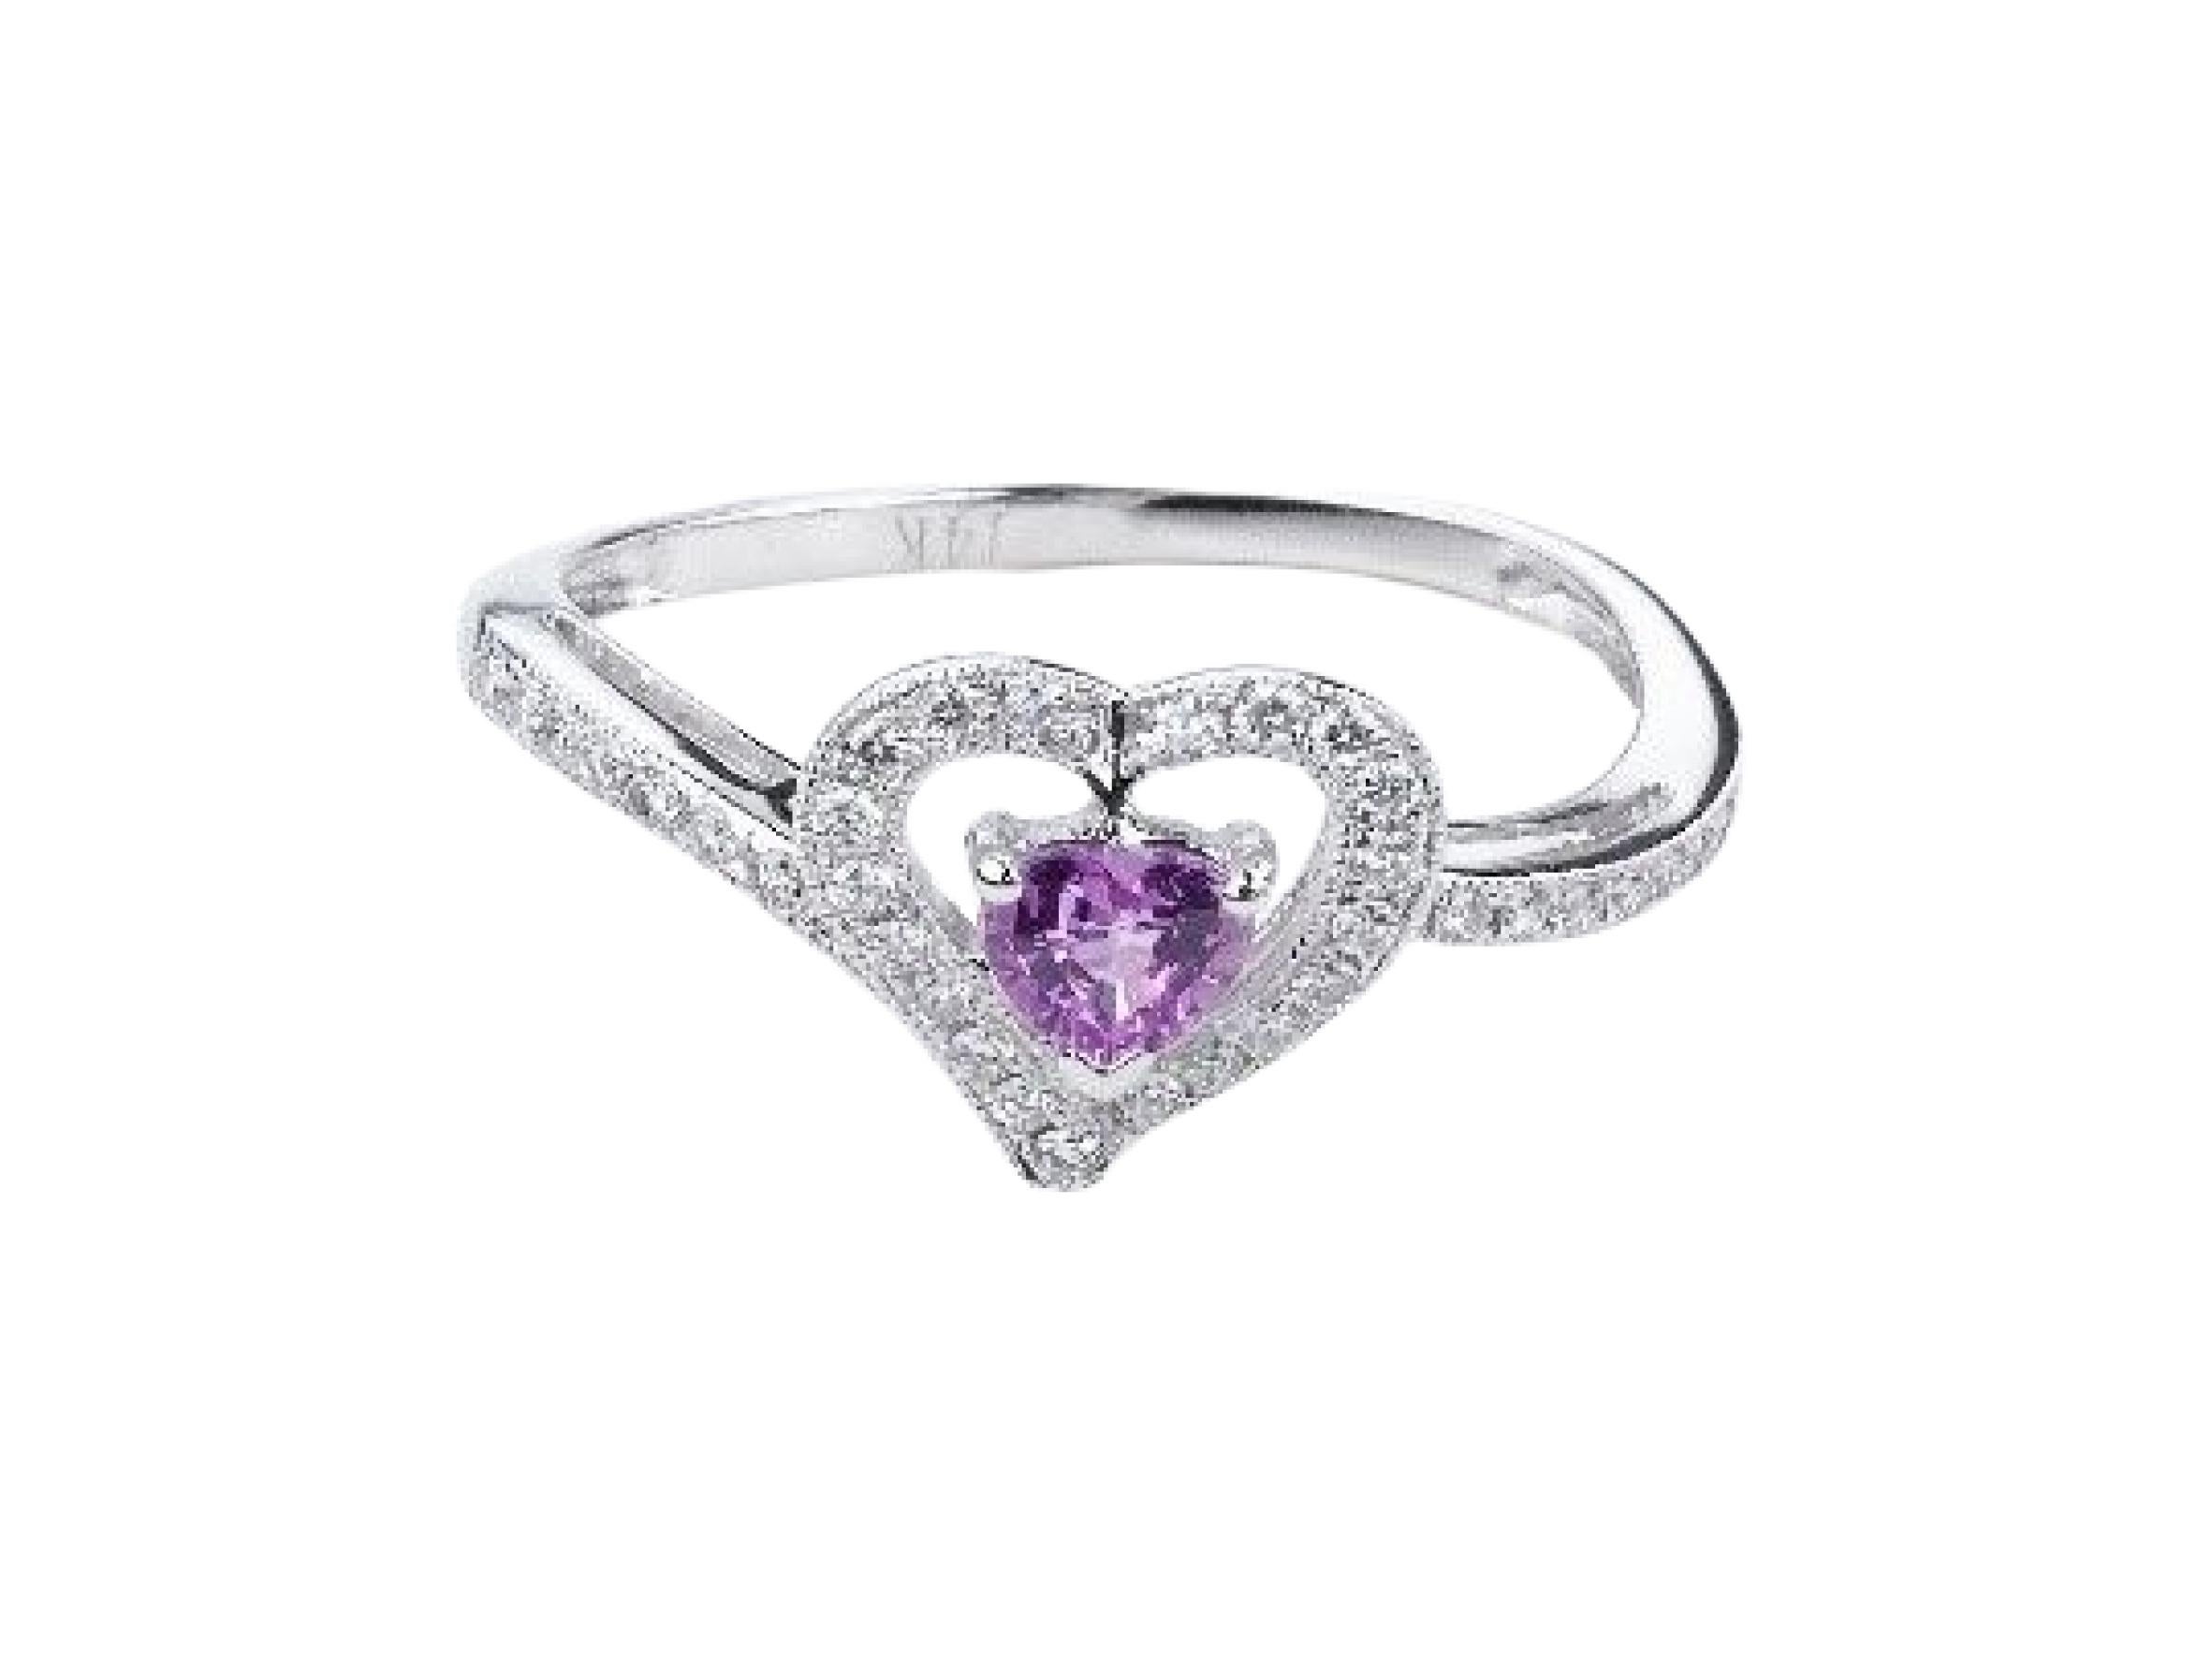 For Sale:  0.403 Carat Pink Sapphire and Diamond Heart Ring in 14 Karat White Gold 3